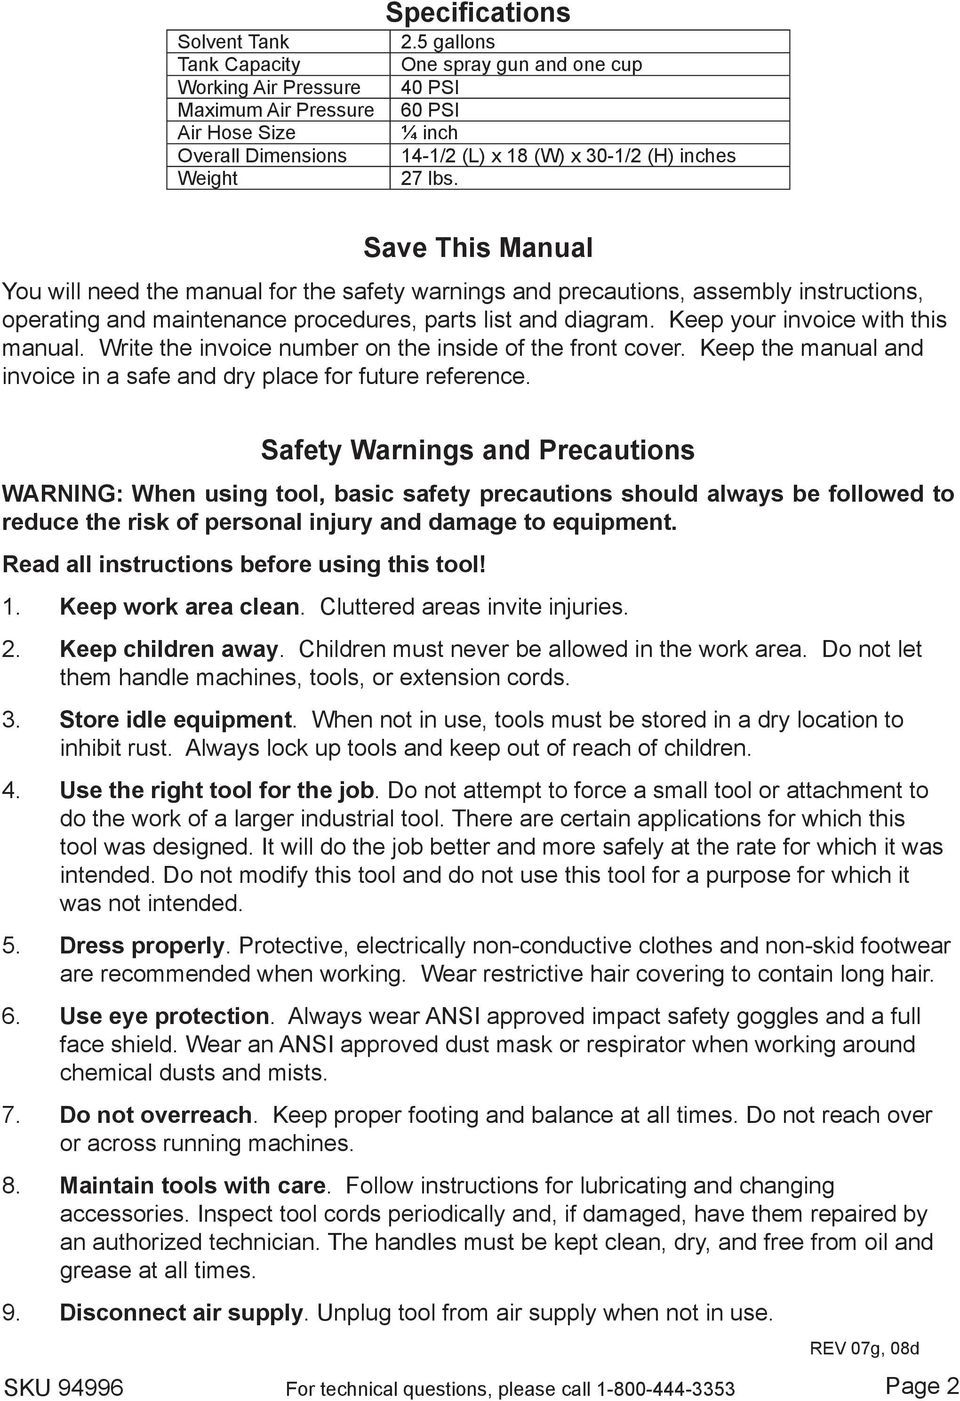 Save This Manual You will need the manual for the safety warnings and precautions, assembly instructions, operating and maintenance procedures, parts list and diagram.